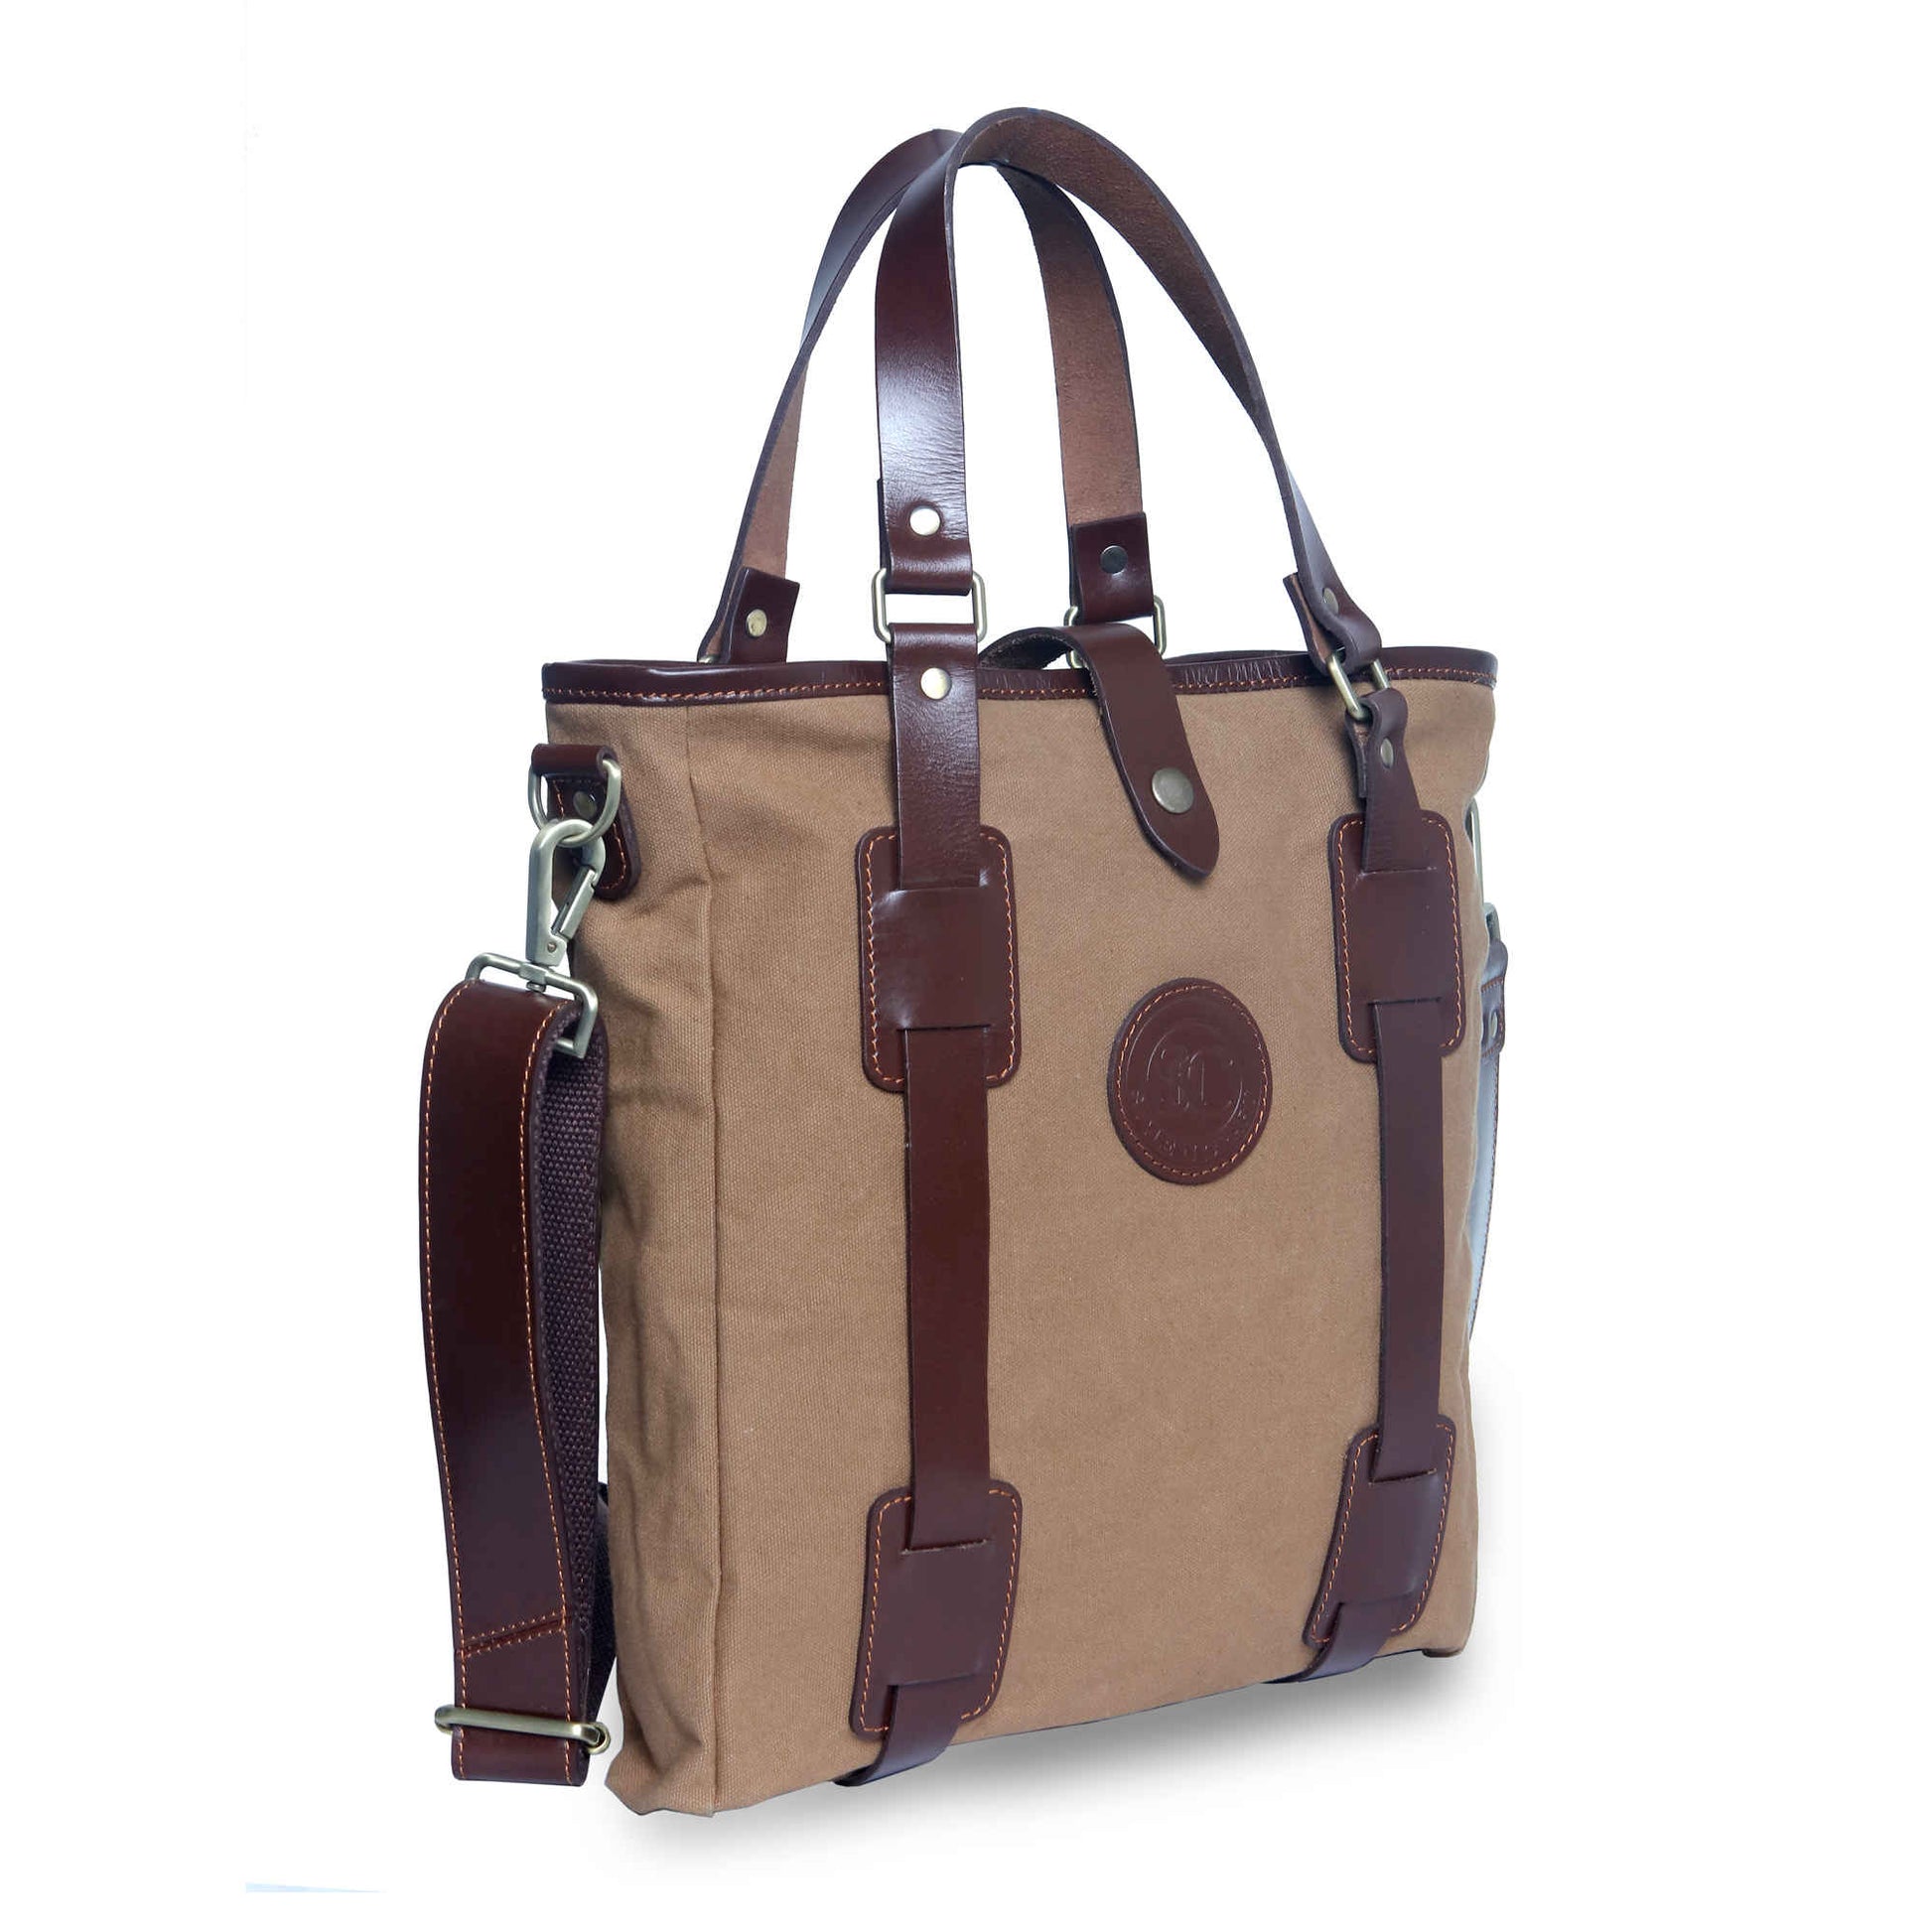 Style n Craft 39003 Unisex Tote Bag in Brown Waterproof Canvas and Full Grain Leather Combination - Front Angled View